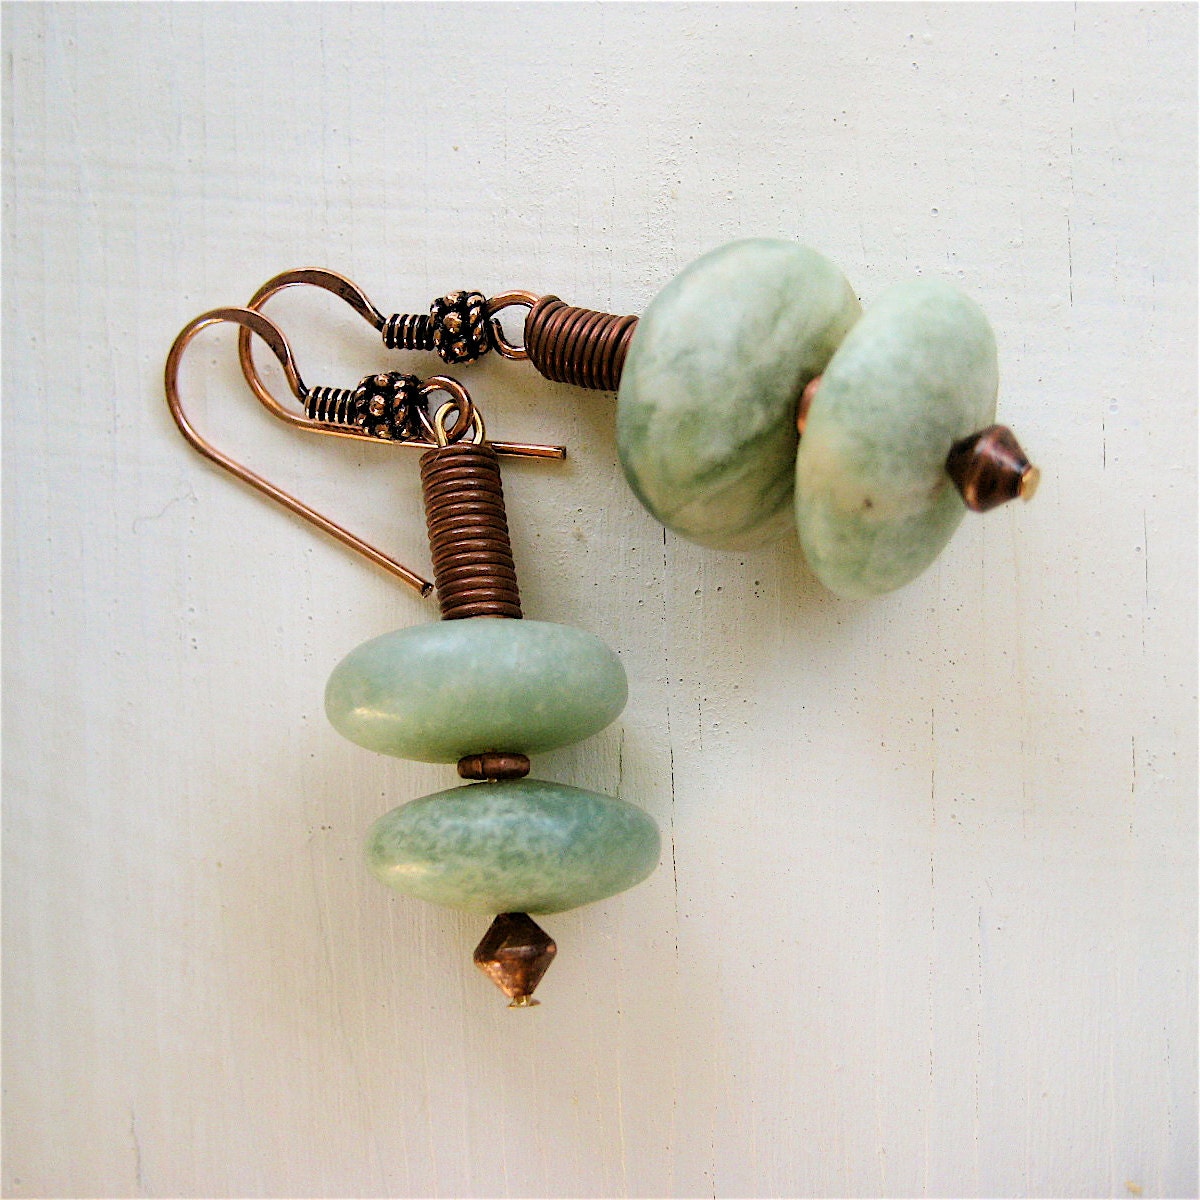 African Jade Earrings with Copper Soft Creamy Green Stone Buttons on Antiqued Copper French Hooks - CatchingWaves